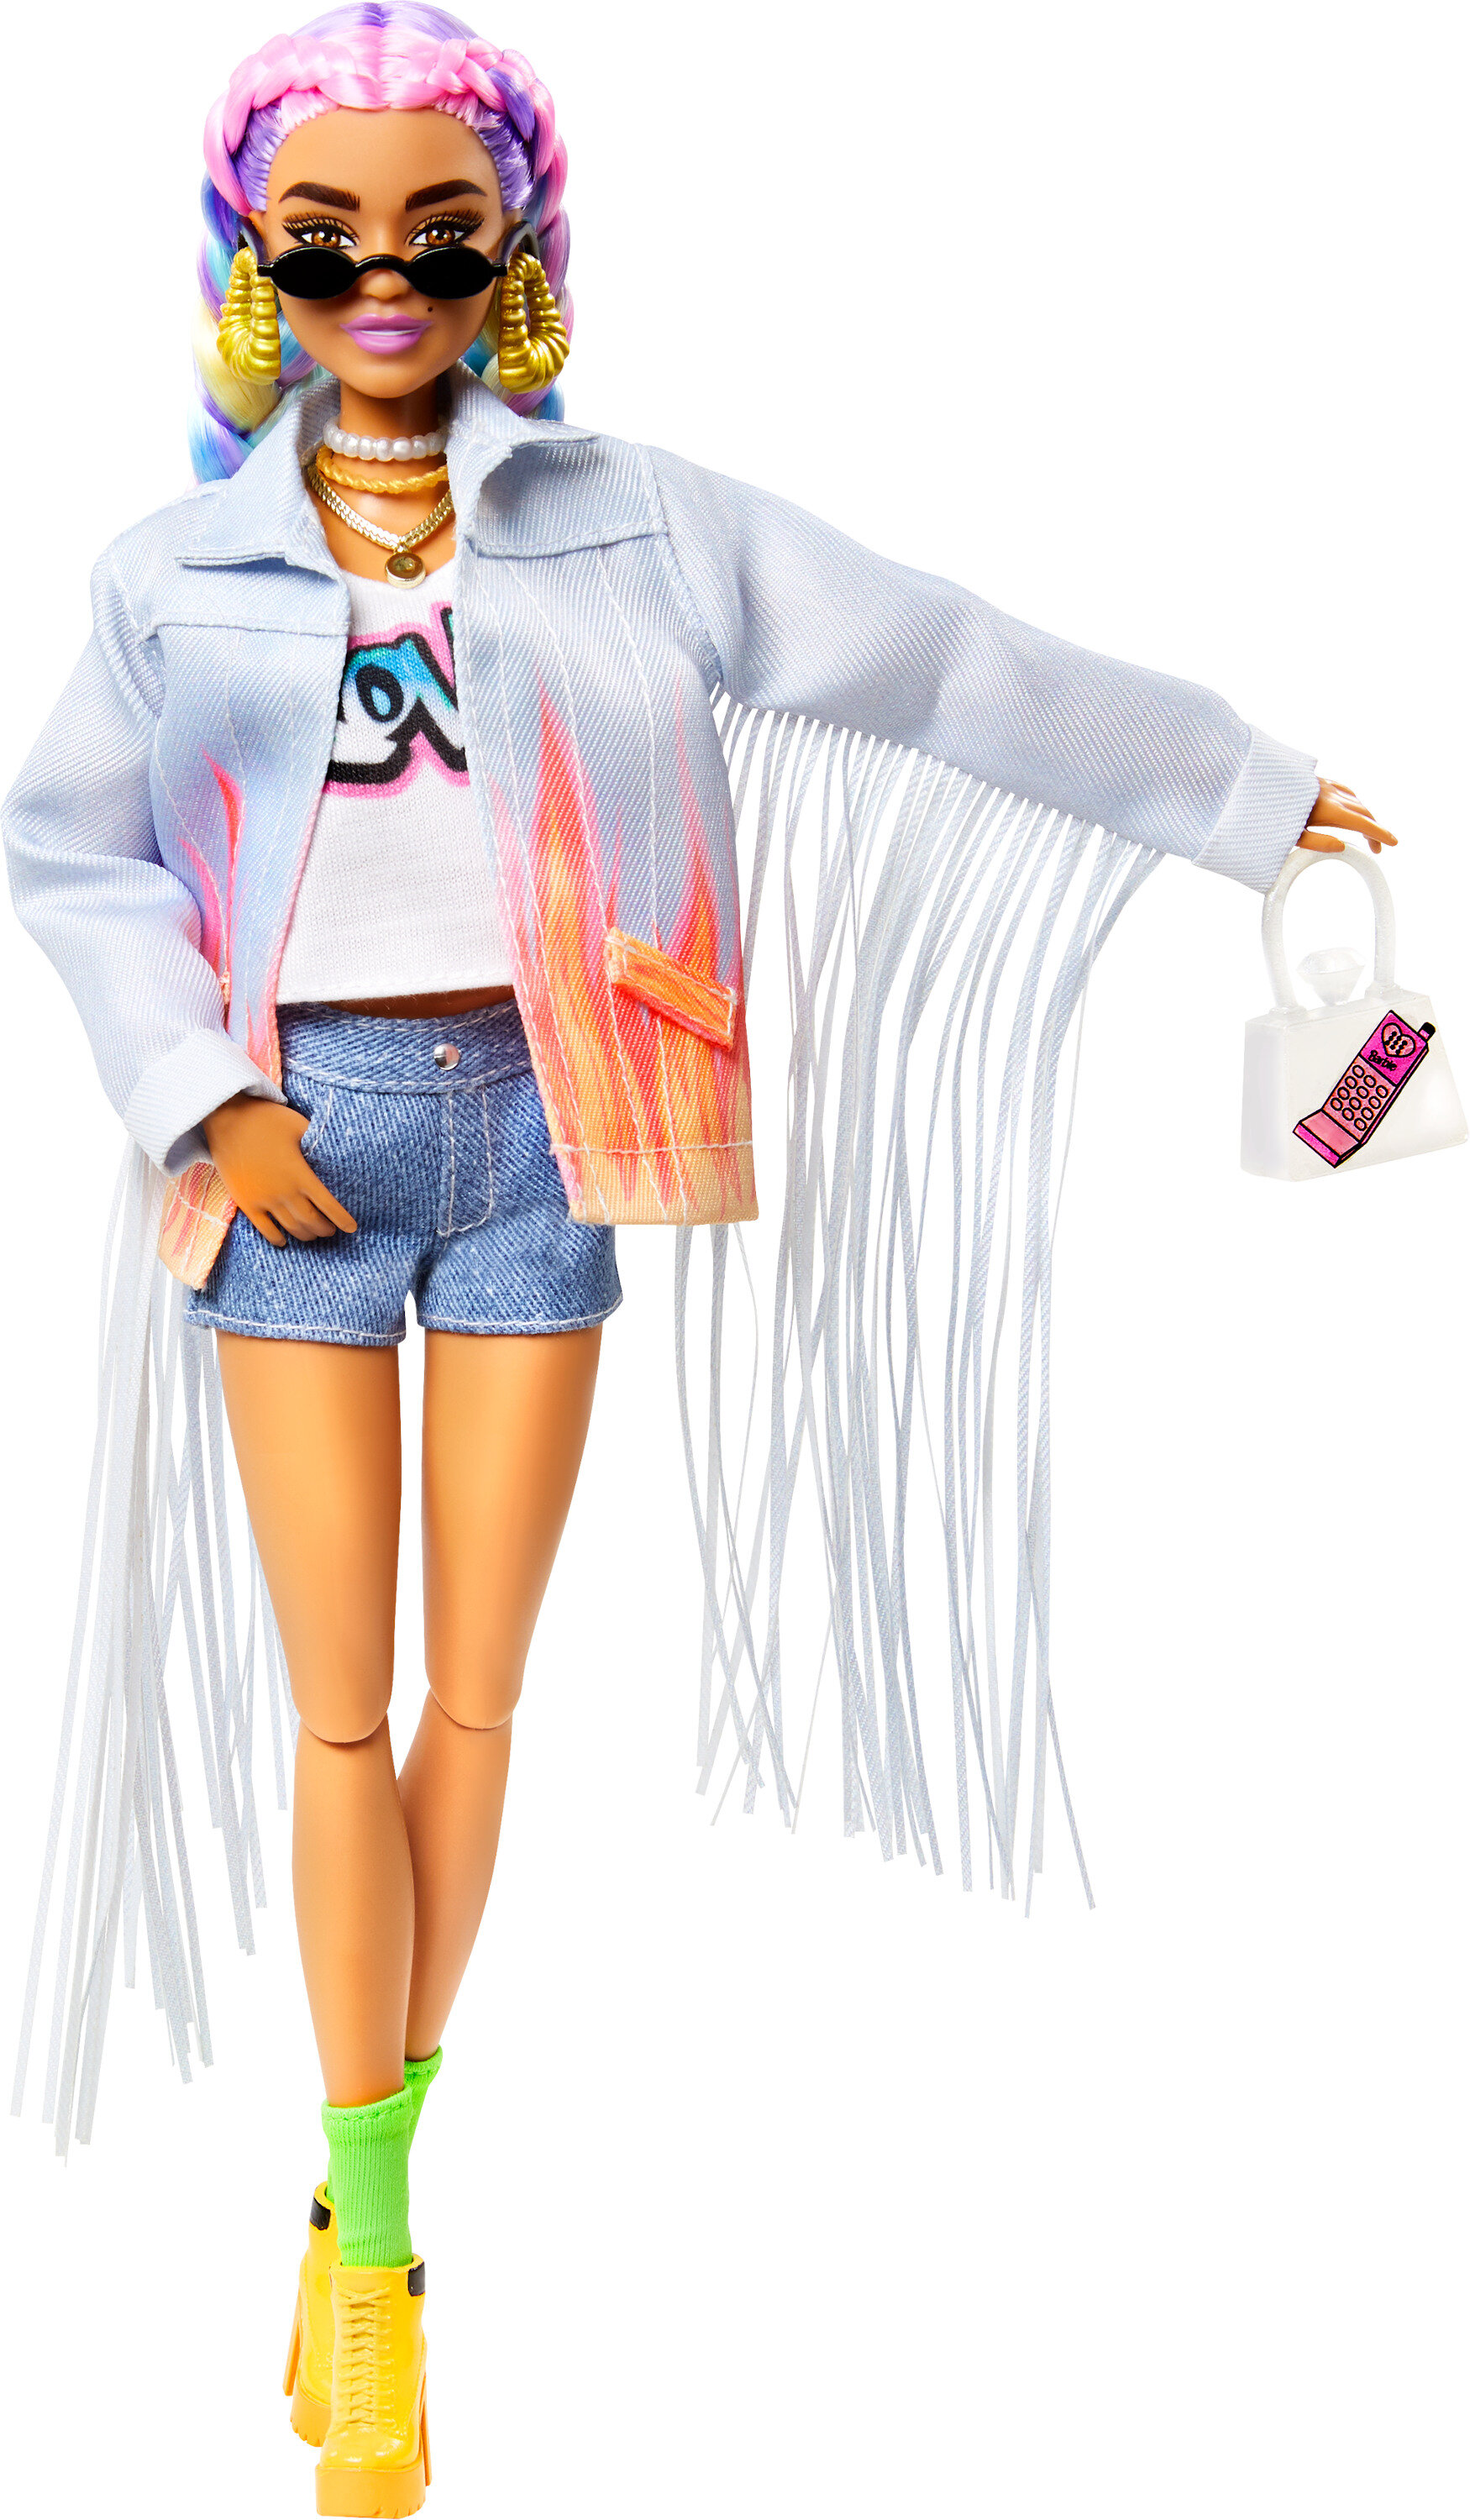 Barbie Extra Doll #5 in Long-Fringe Denim Jacket with Pet Puppy for Kids 3 Years Old & Up - image 5 of 8